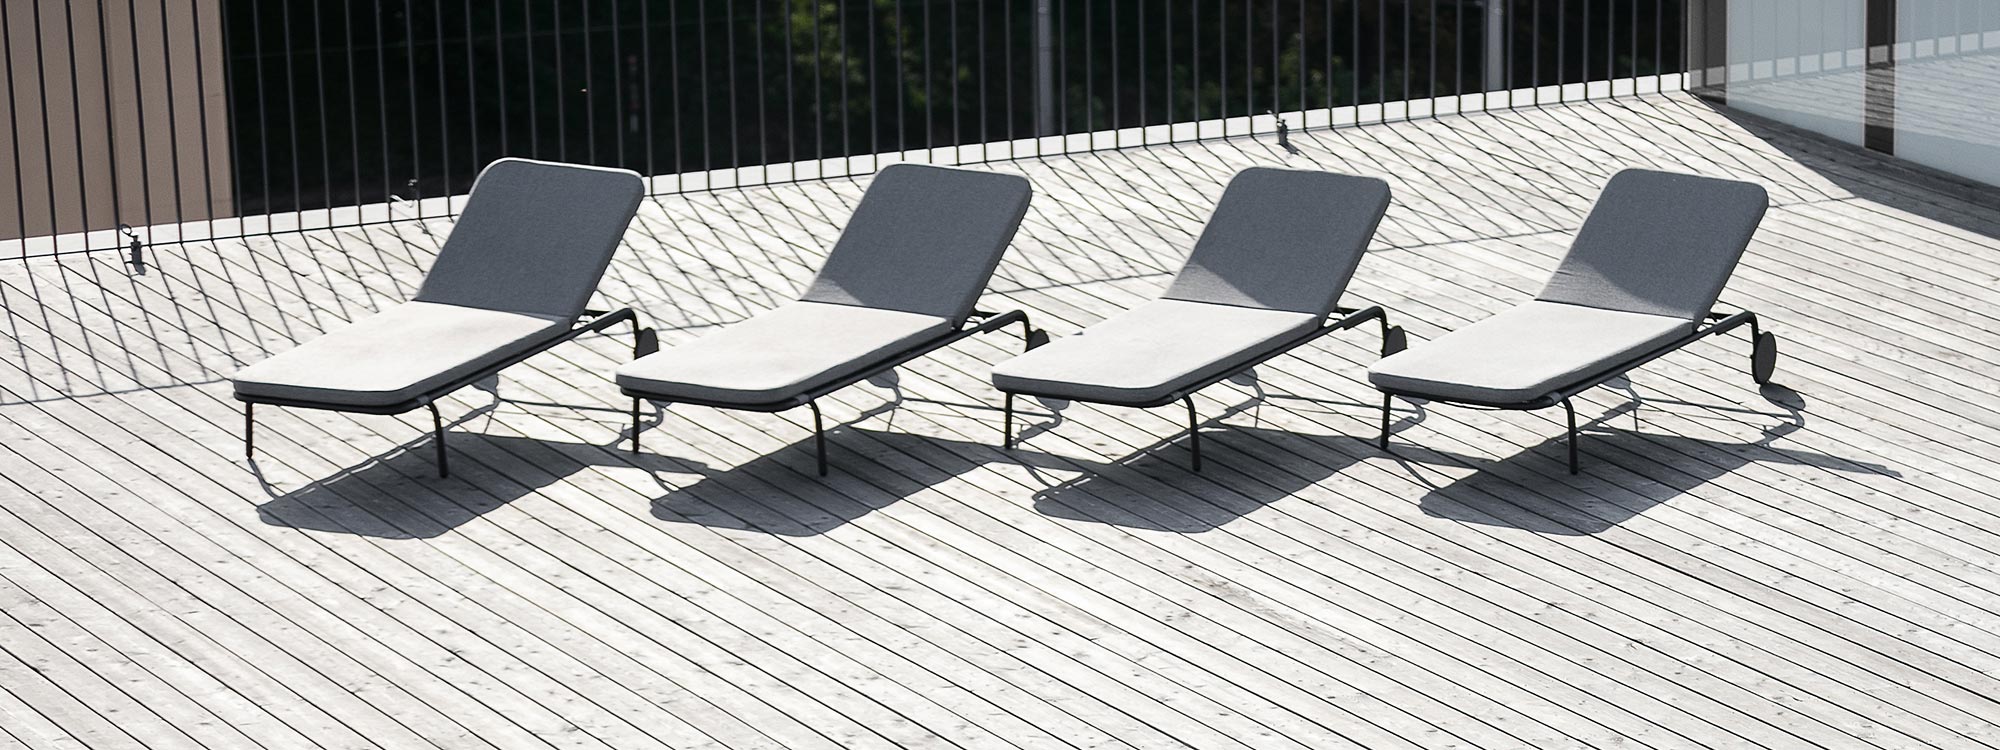 Image of row of 4 Starling sun loungers in anthracite stainless steel with light-grey cushions, on wooden decking in the sun